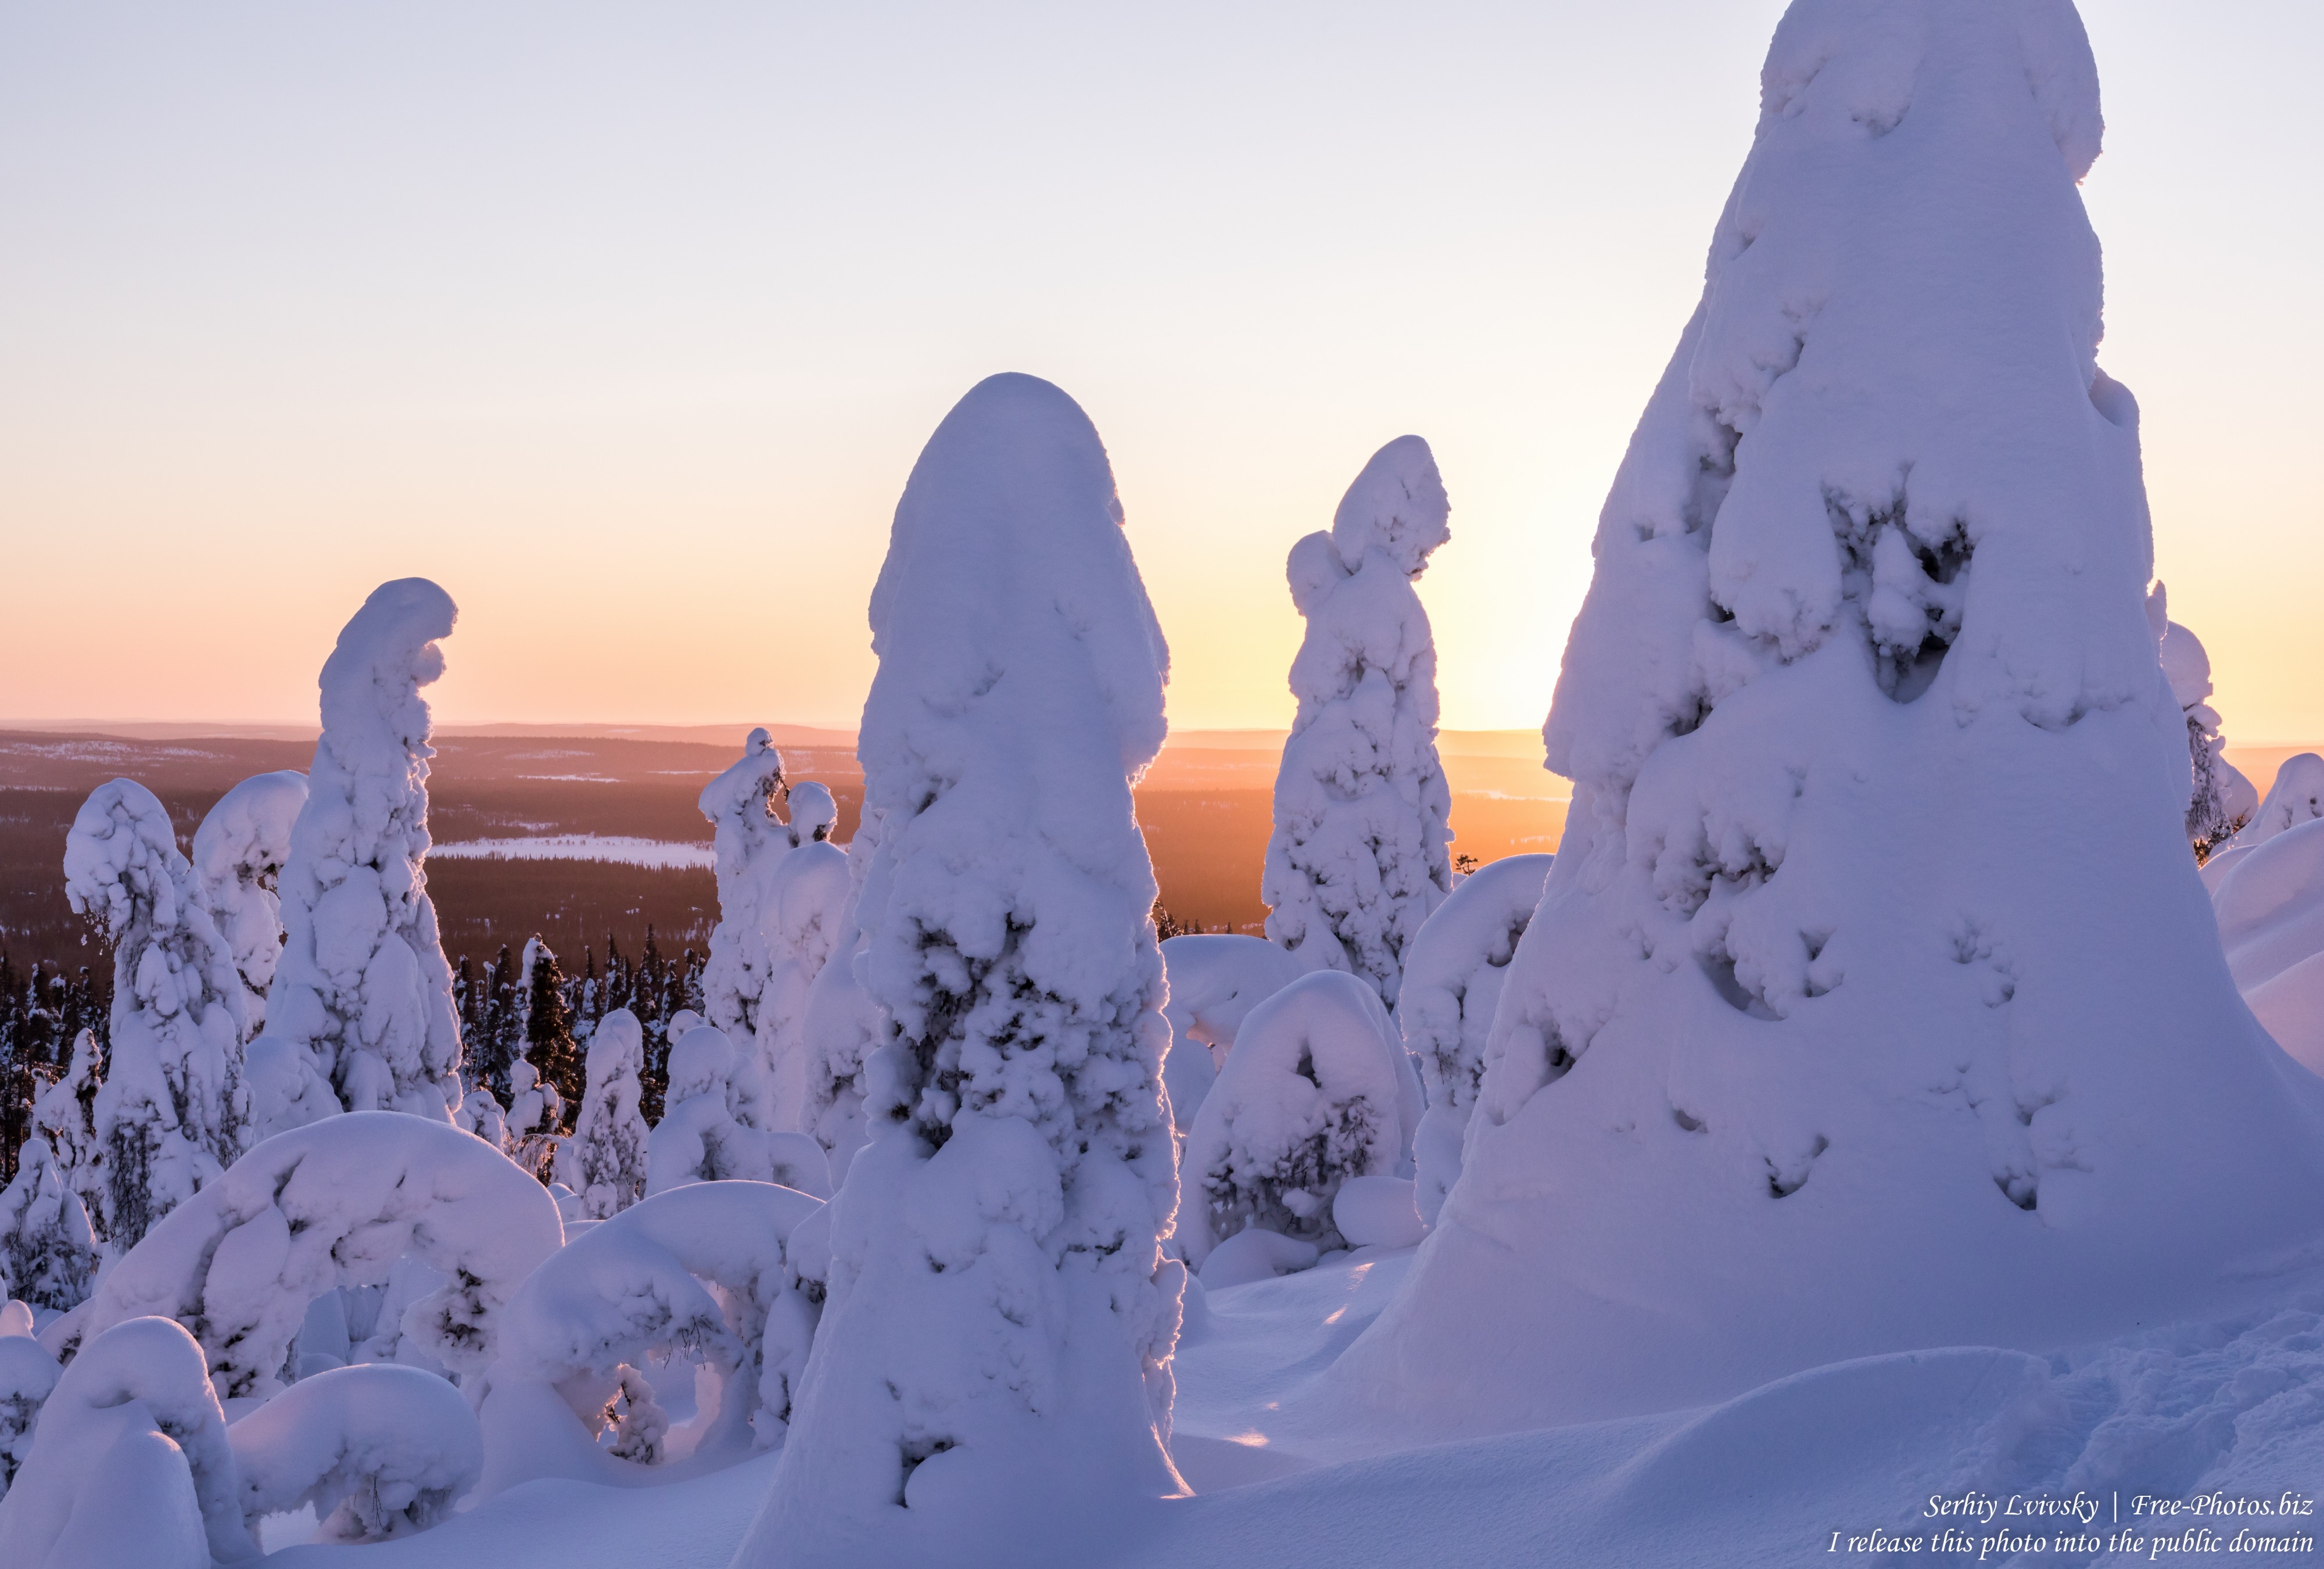 Valtavaara, Finland, photographed in January 2020 by Serhiy Lvivsky, picture 34